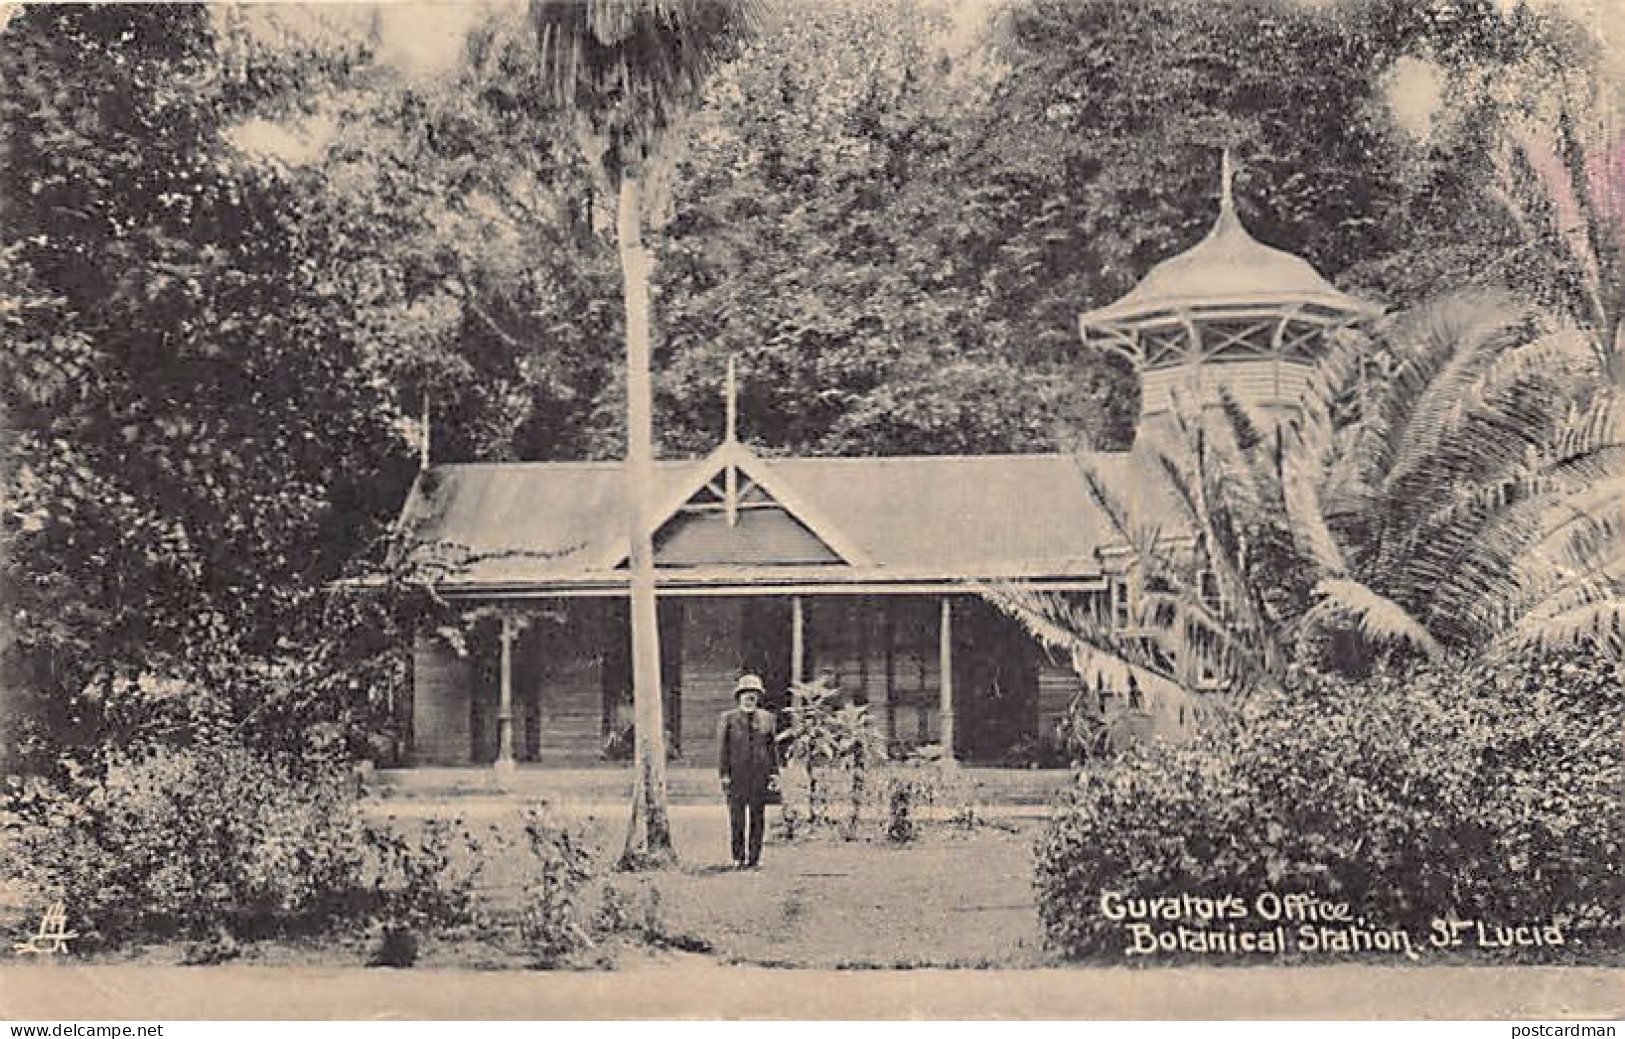 Saint Lucia - CASTRIES - Curator's Office, Botanical Garden - THE POSTCARD IS LIGHTLY UNSTICKED - Publ. Clarke & Co.  - Sainte-Lucie